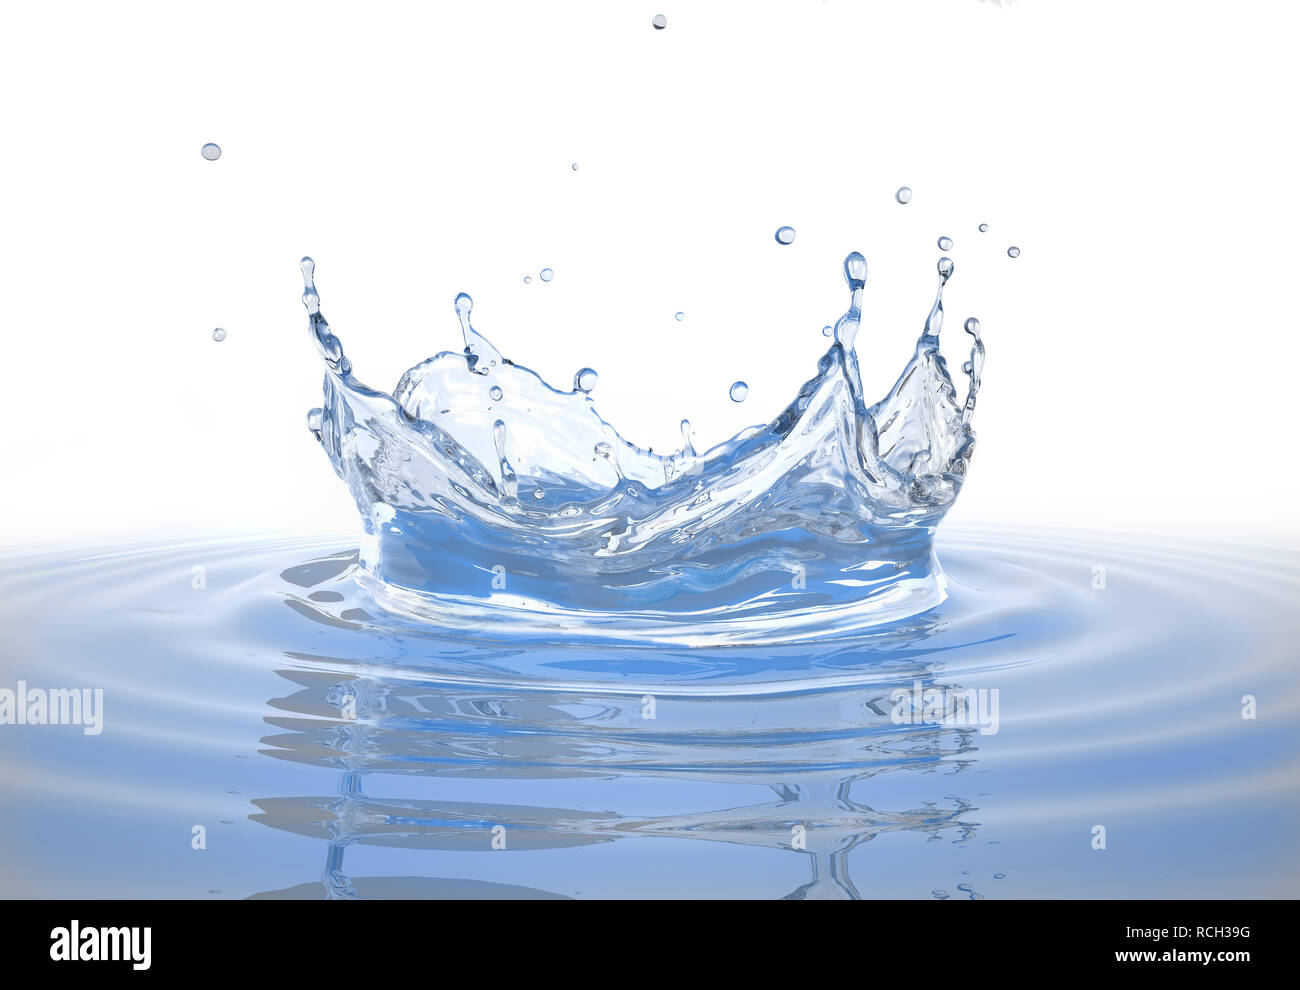 Water crown splash in a water pool, with circular ripples around. Isolated on white background. Stock Photo